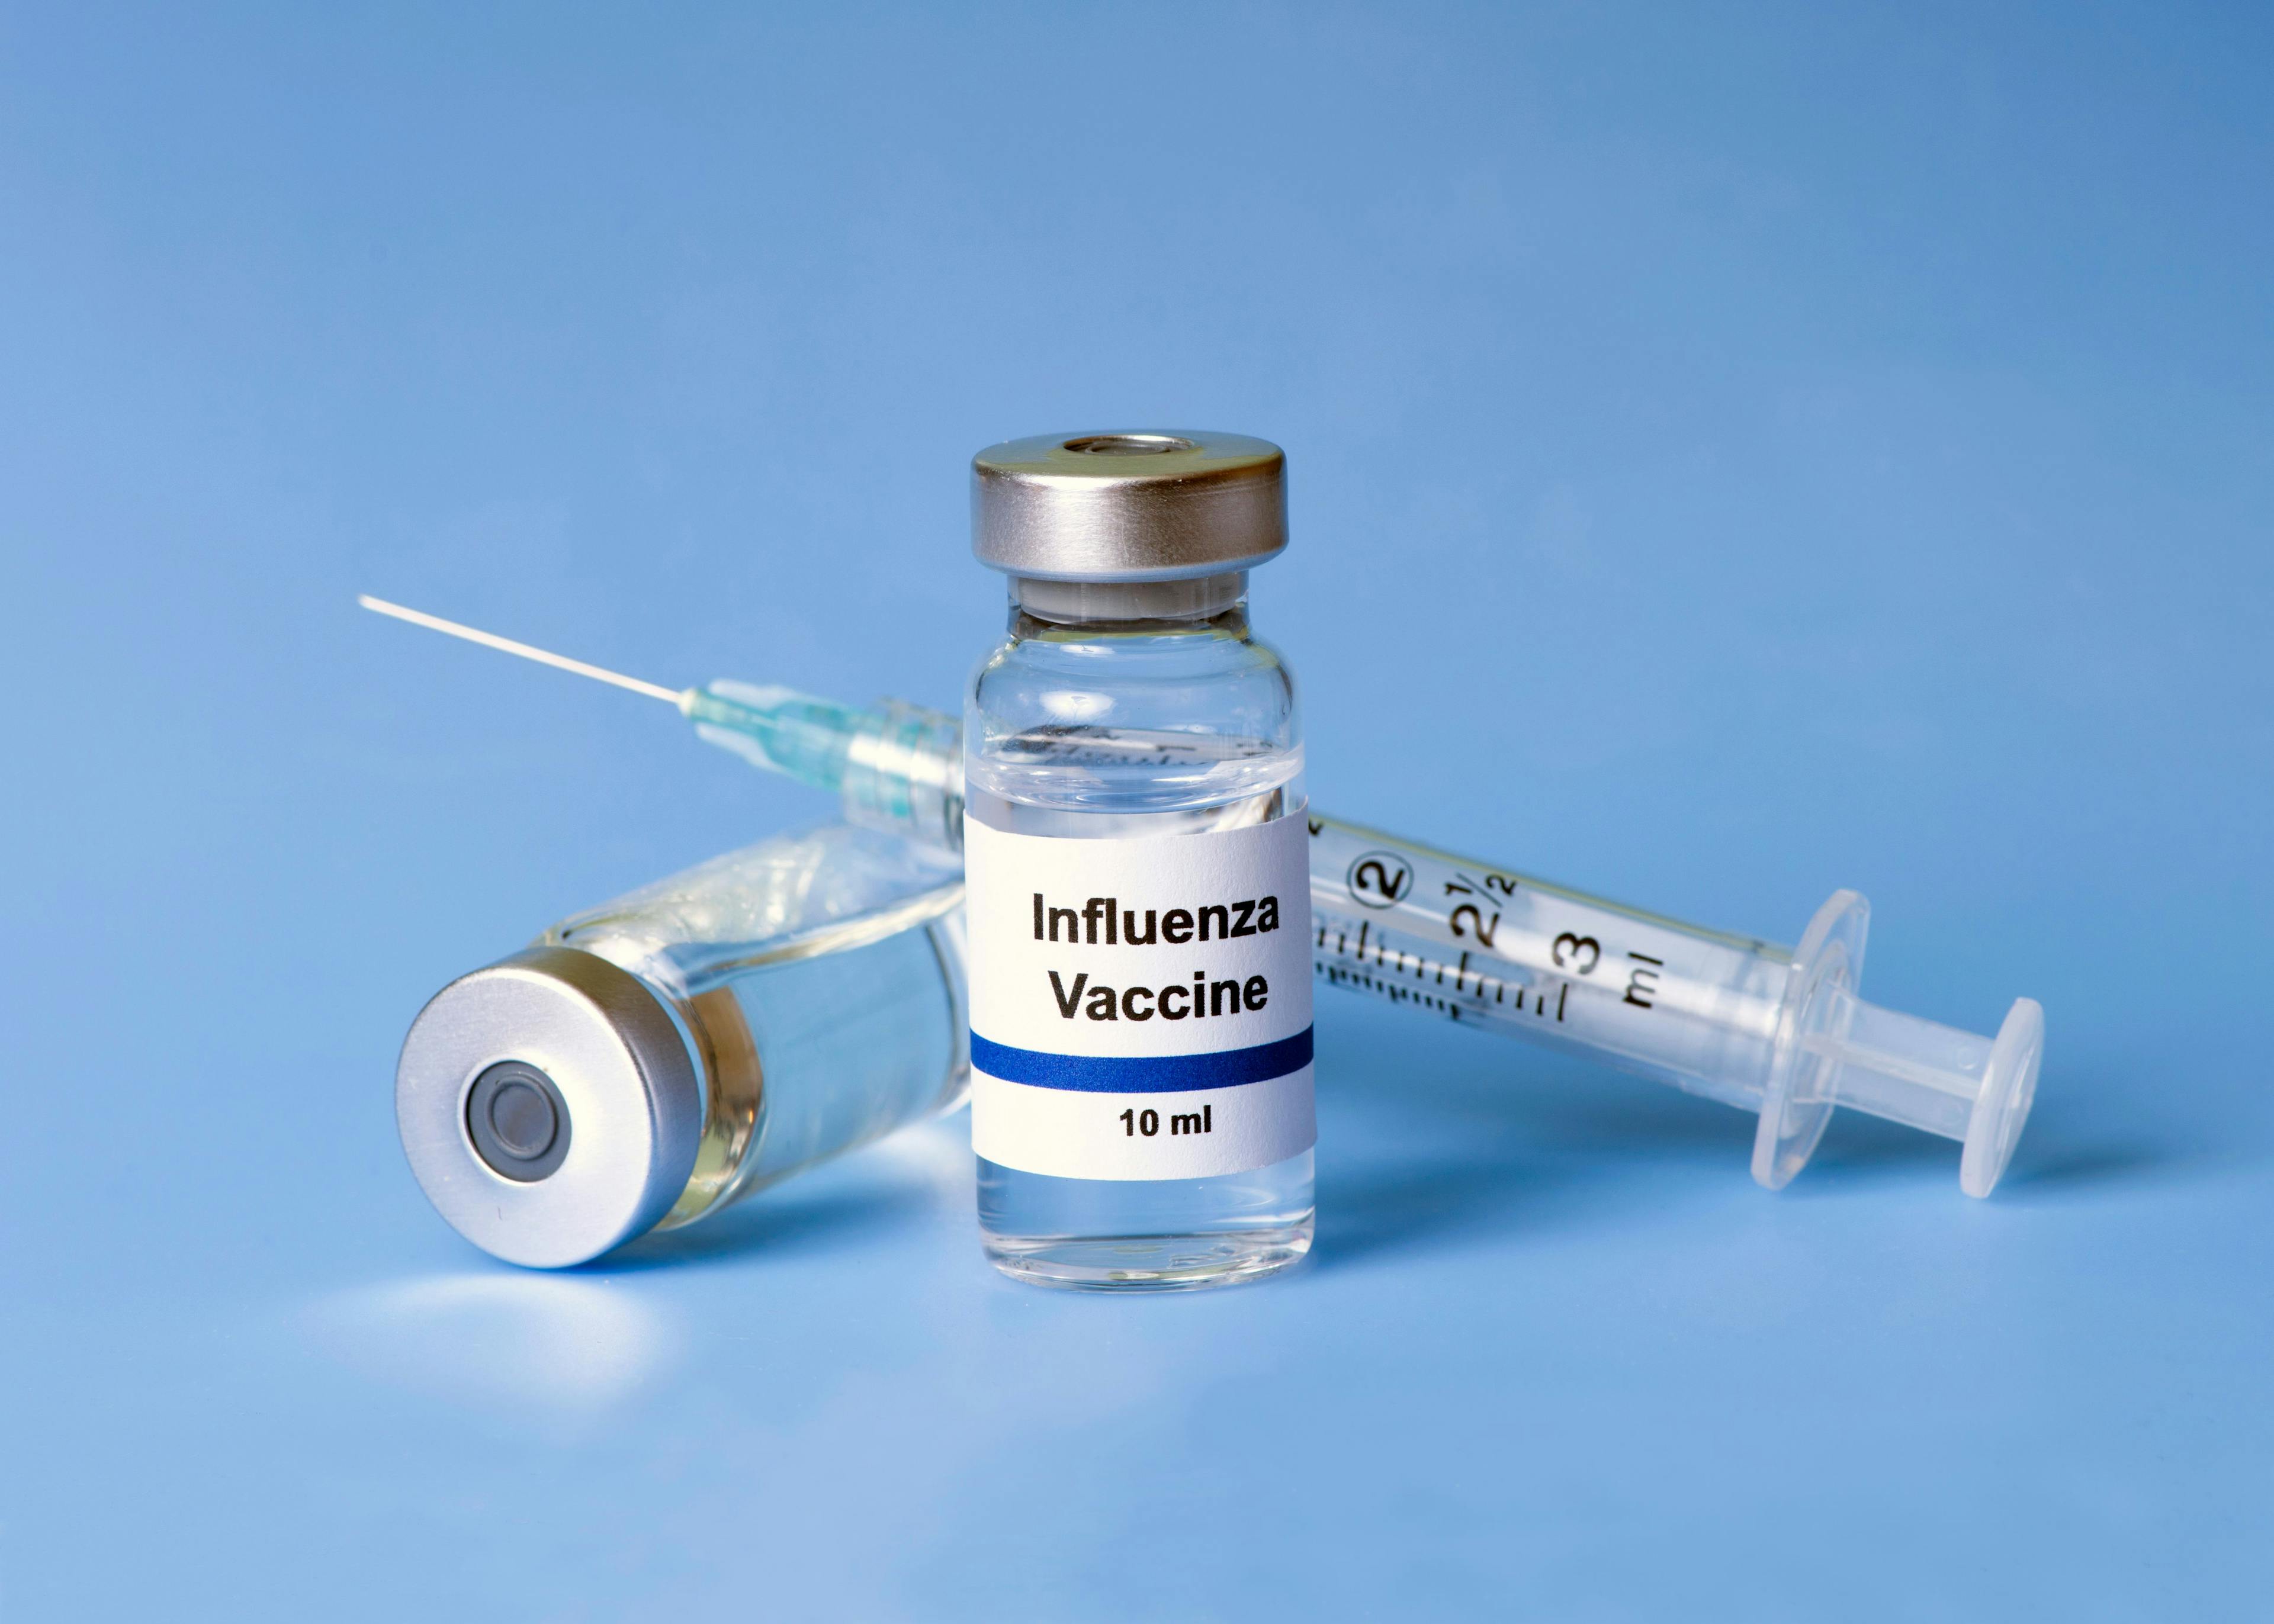 Advisory Committee on Immunization Practices updates influenza vaccine recommendations | Image Credit: © Sherry Young - © Sherry Young - stock.adobe.com.